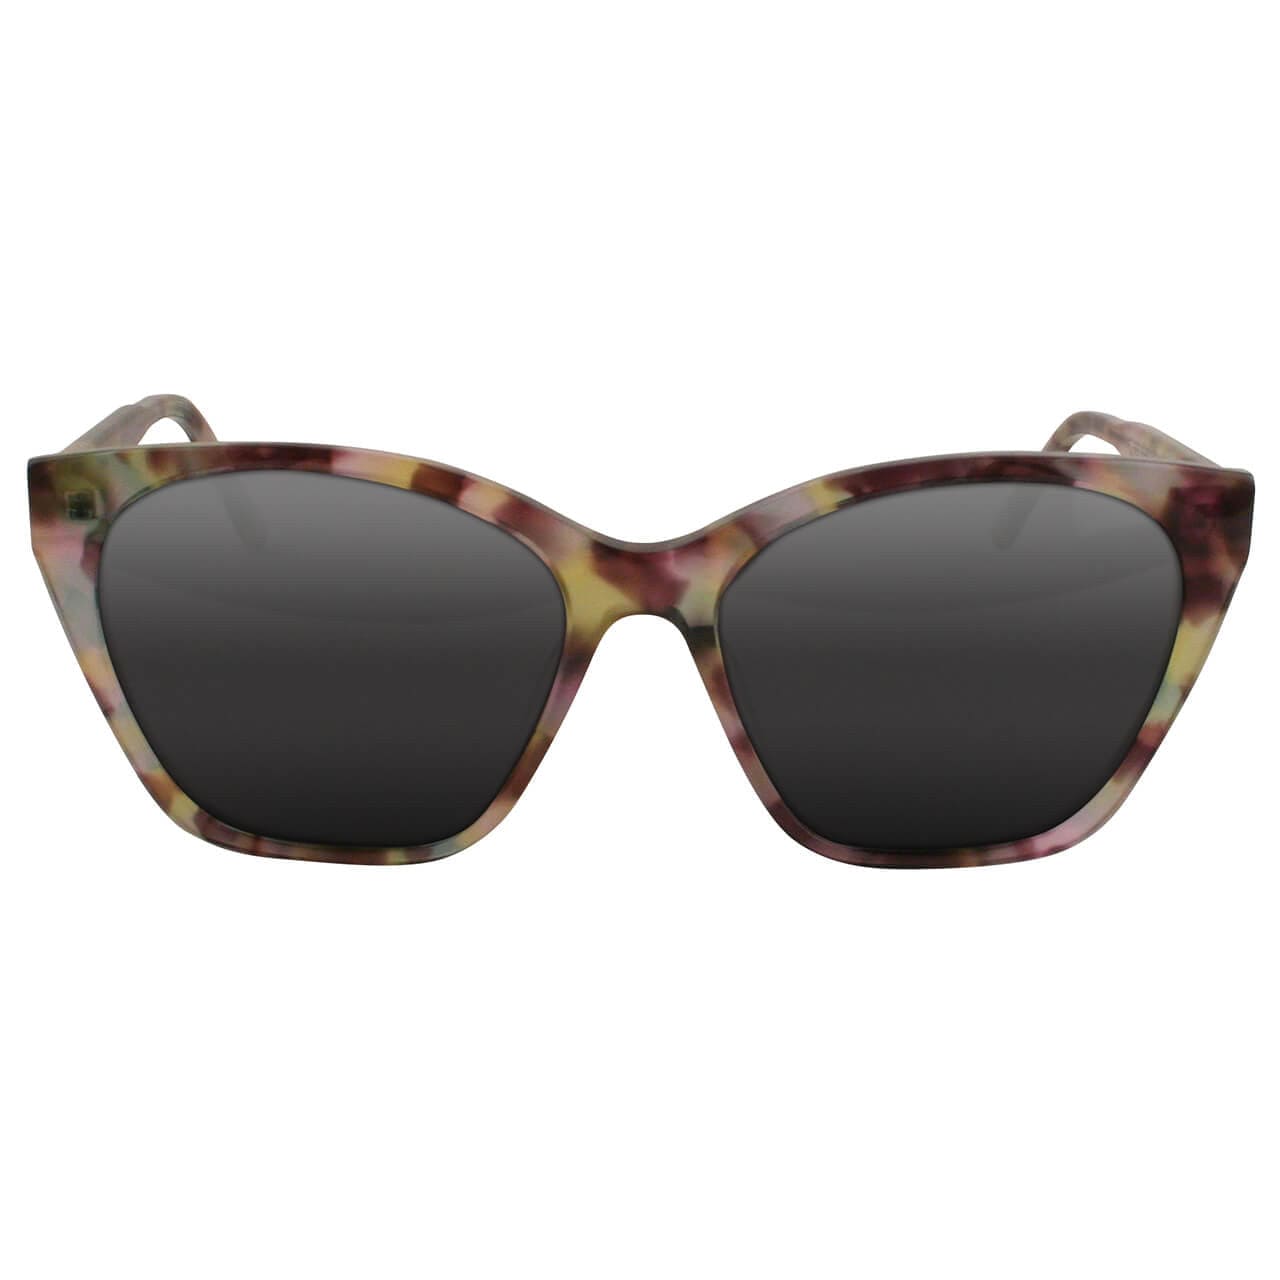 Solect Hydro Sunglasses with Tortoise Pink Frame and Gray Polarized Lenses Front View